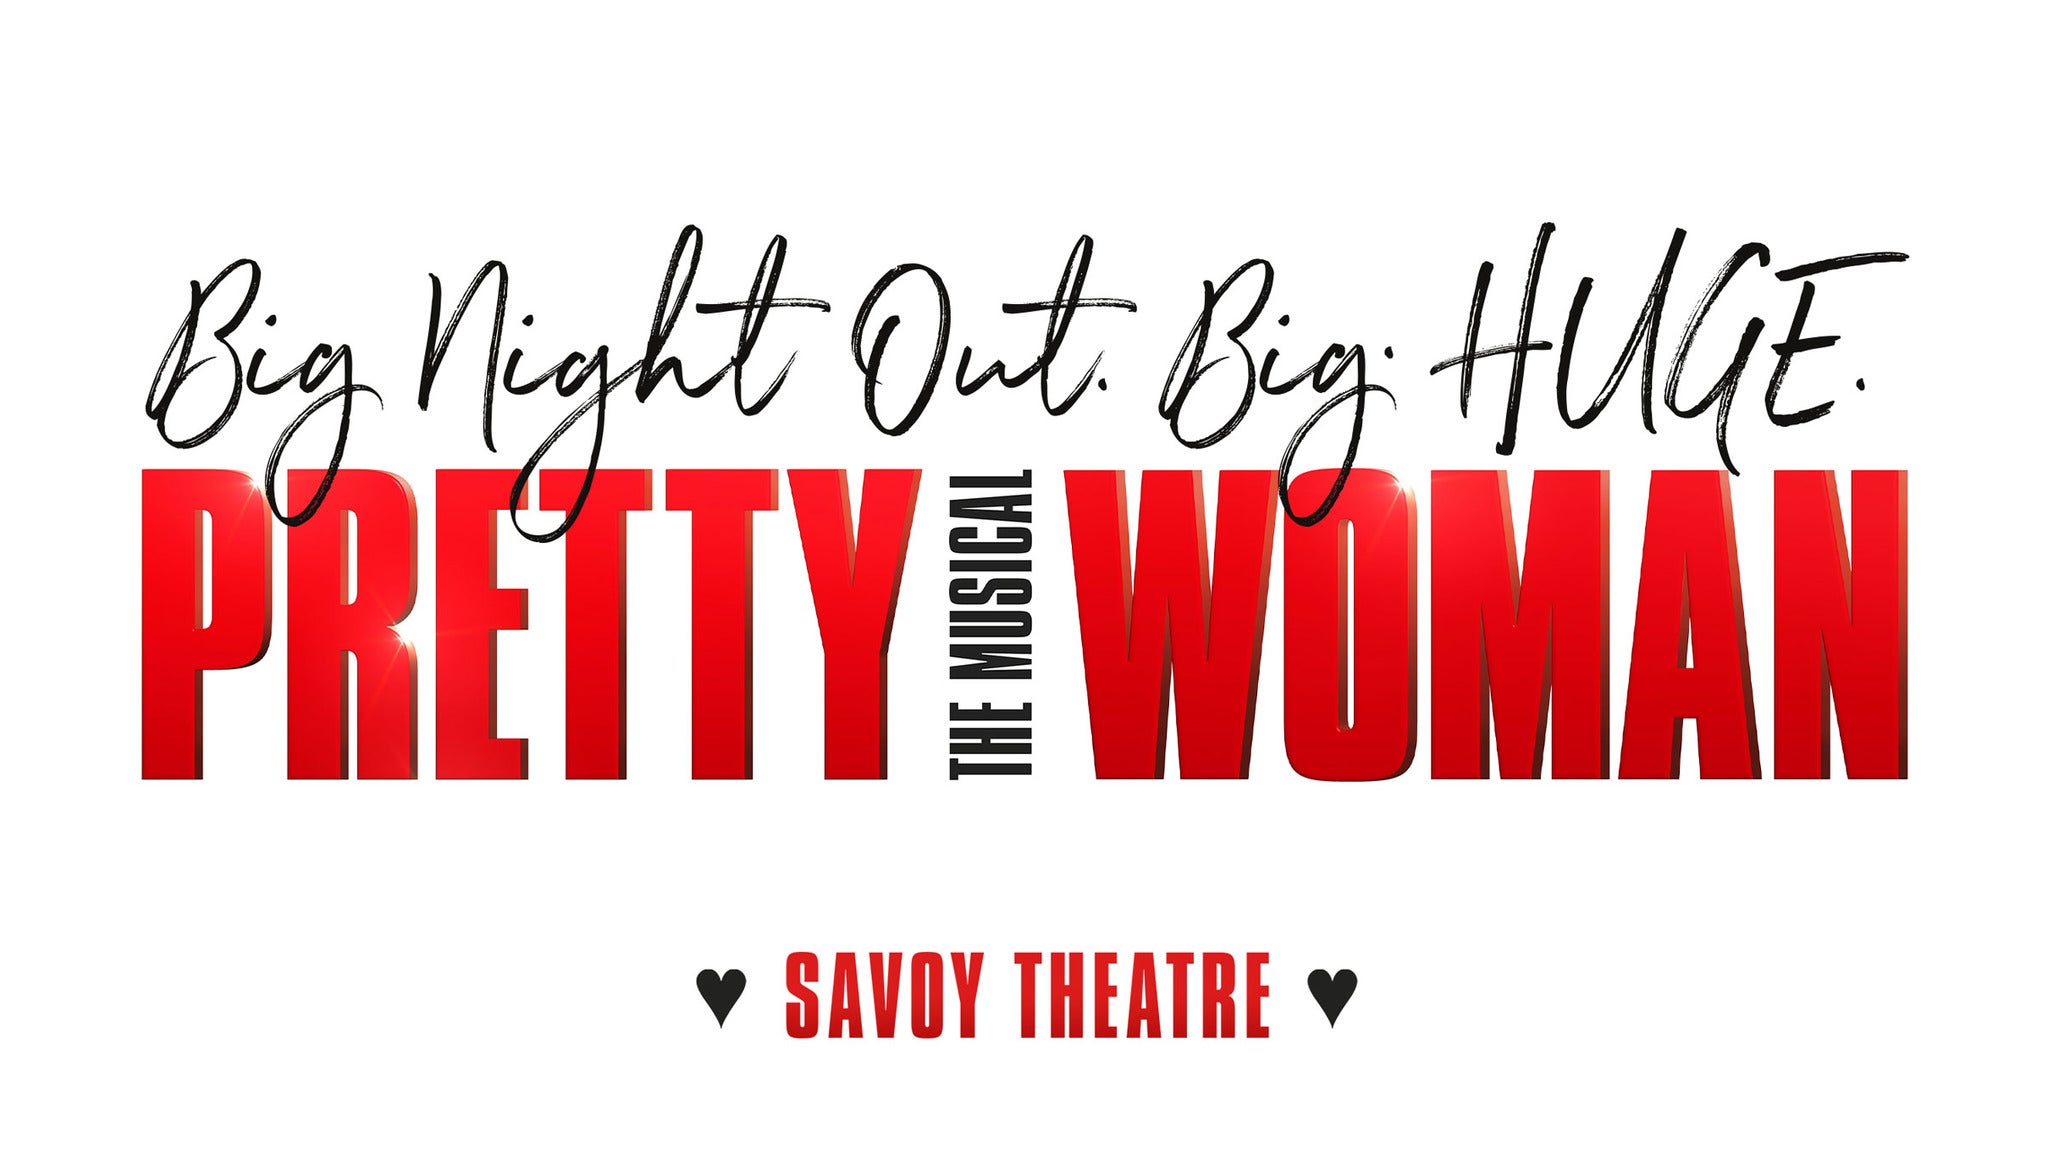 Pretty Woman: The Musical Event Title Pic